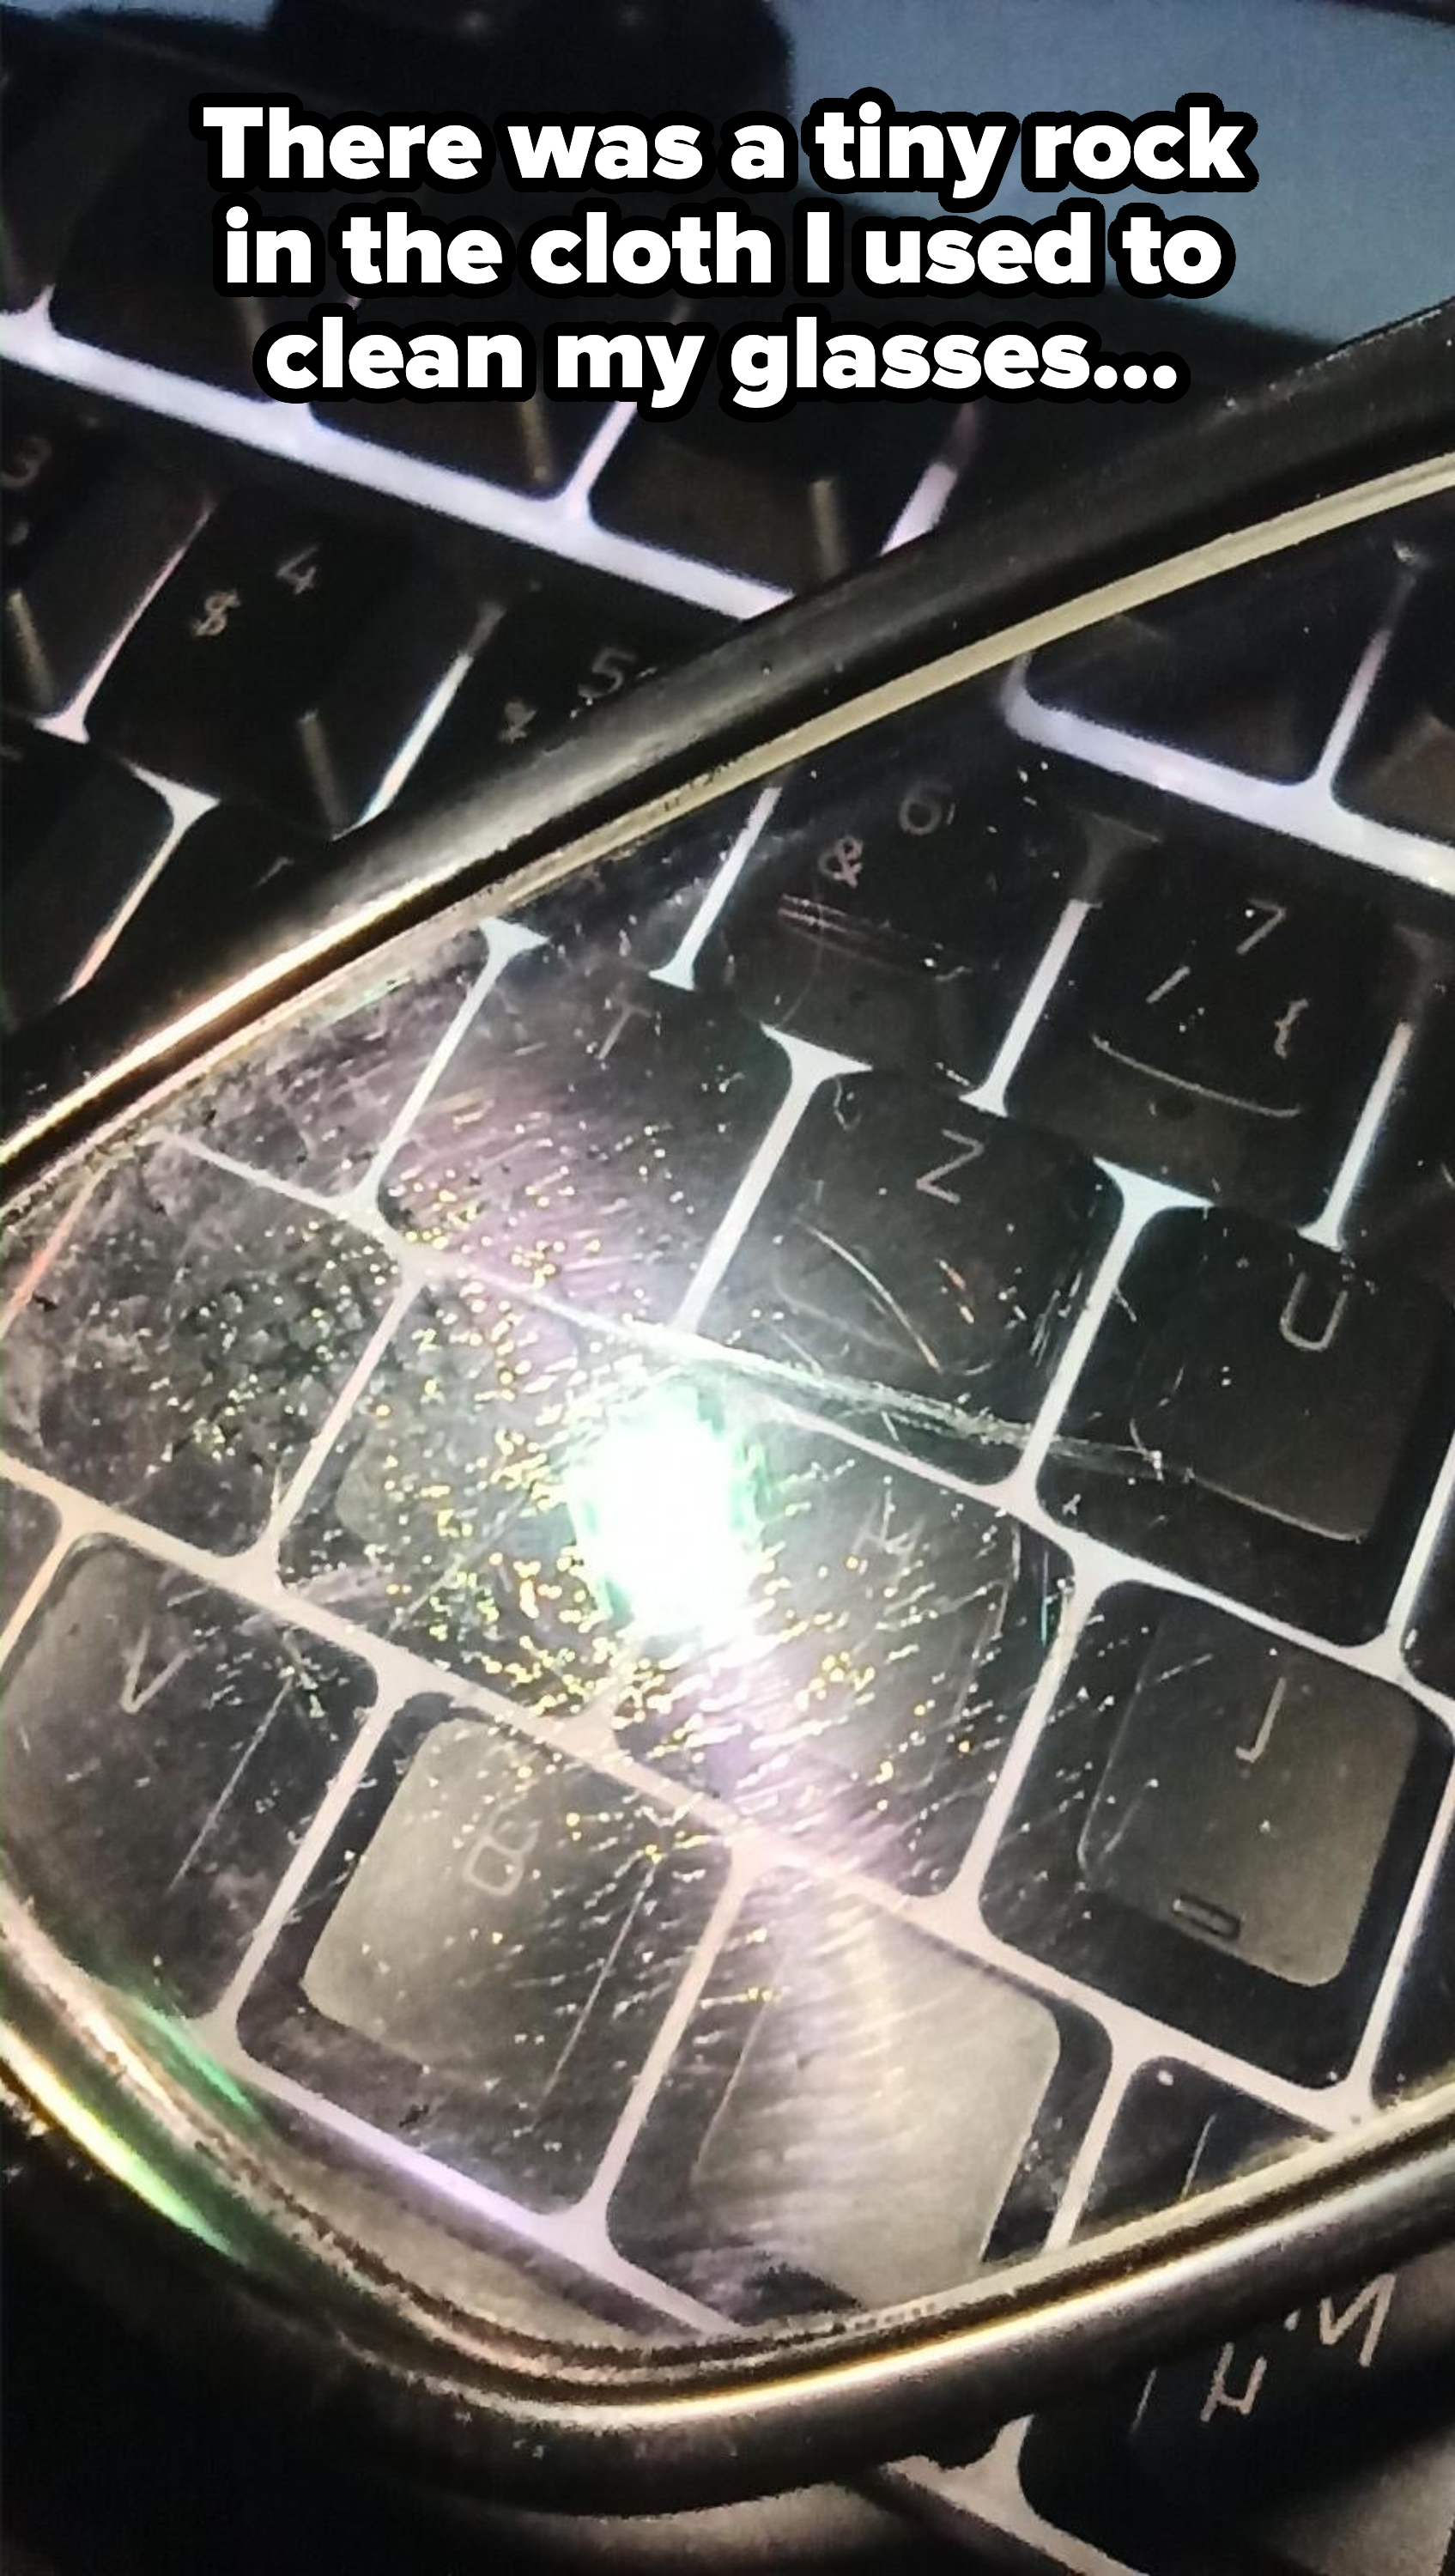 Close-up of dirty glasses lying on a laptop keyboard, reflecting light